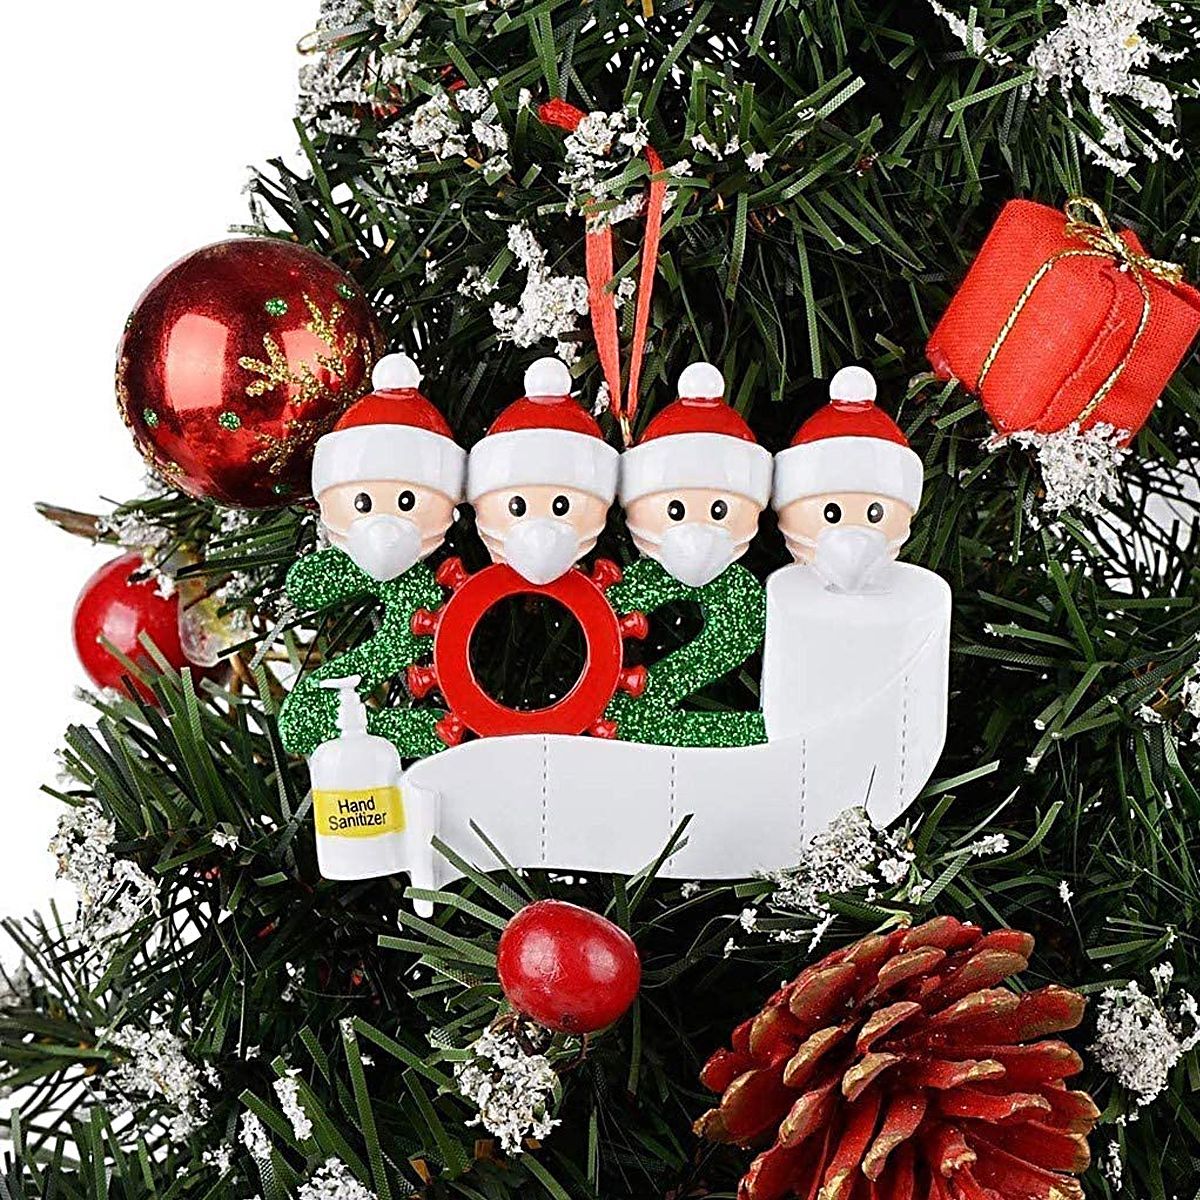 2020-Merry-Christmas-Tree-Hanging-Ornaments-Family-DIY-Personalized-Decor-Gifts-1777899